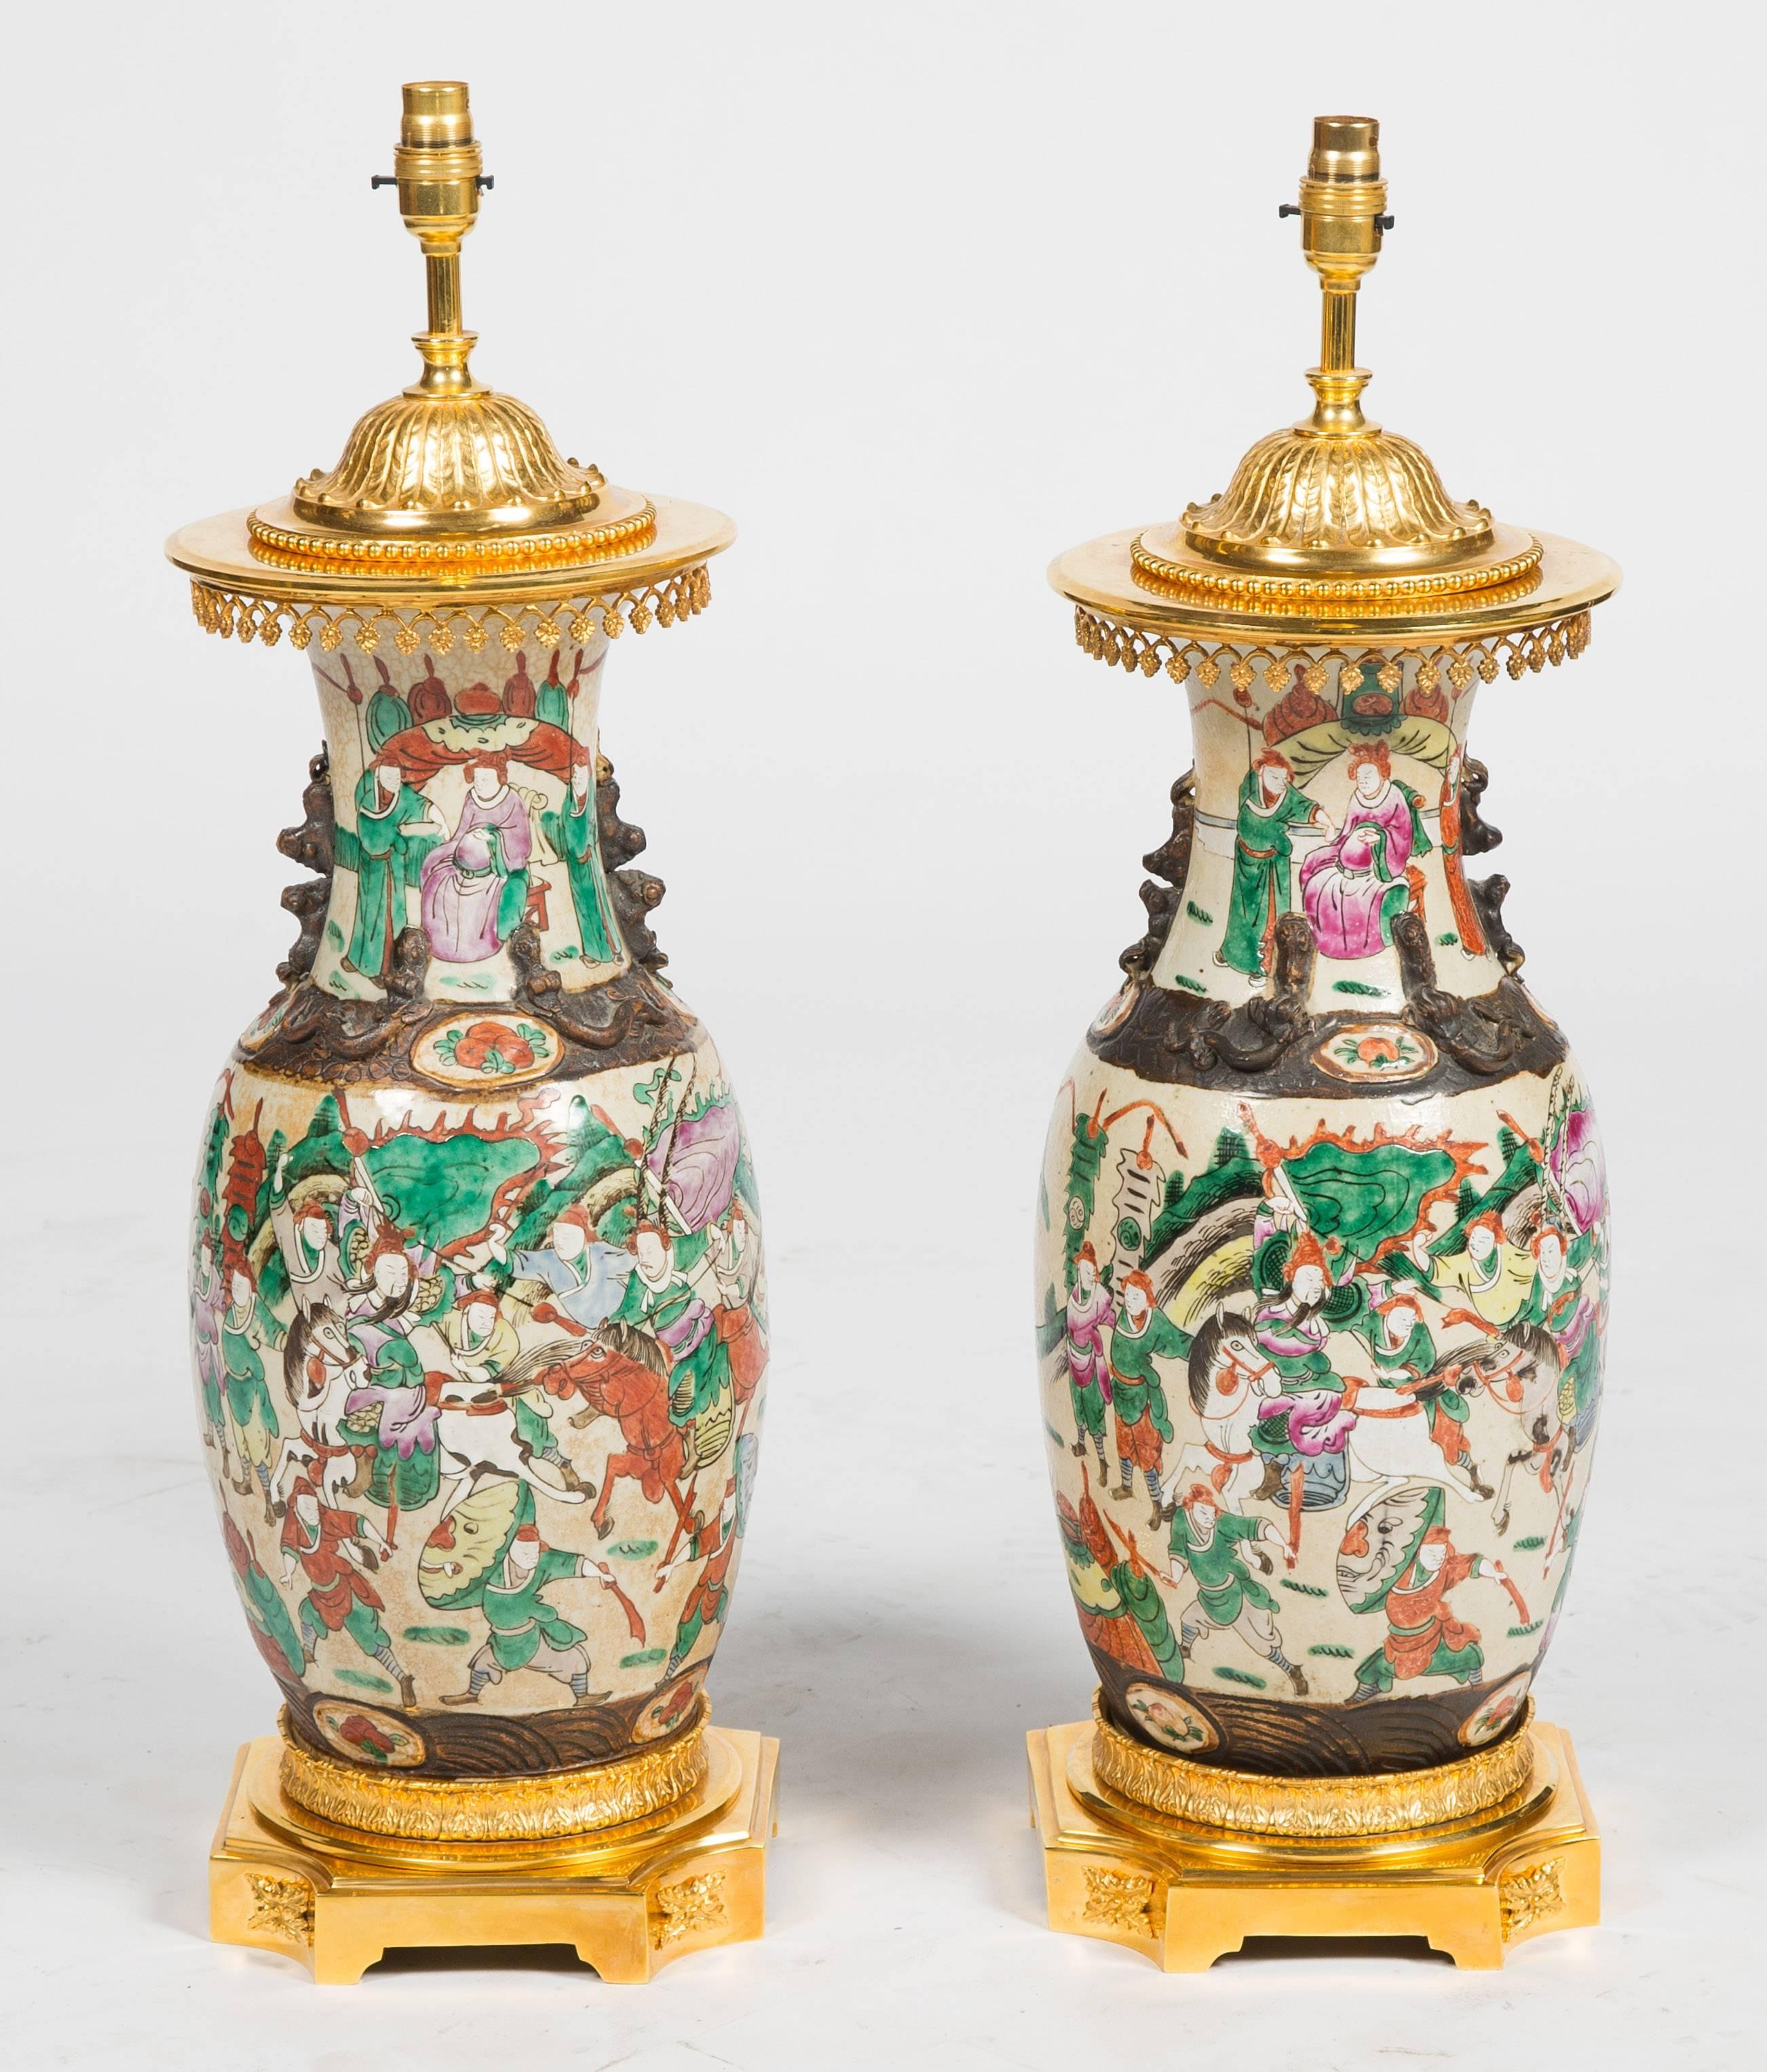 An impressive pair of 19th century Chinese crackleware vases, having classical scenes of warriors on horseback and mounted with gilded French ormolu mounts.